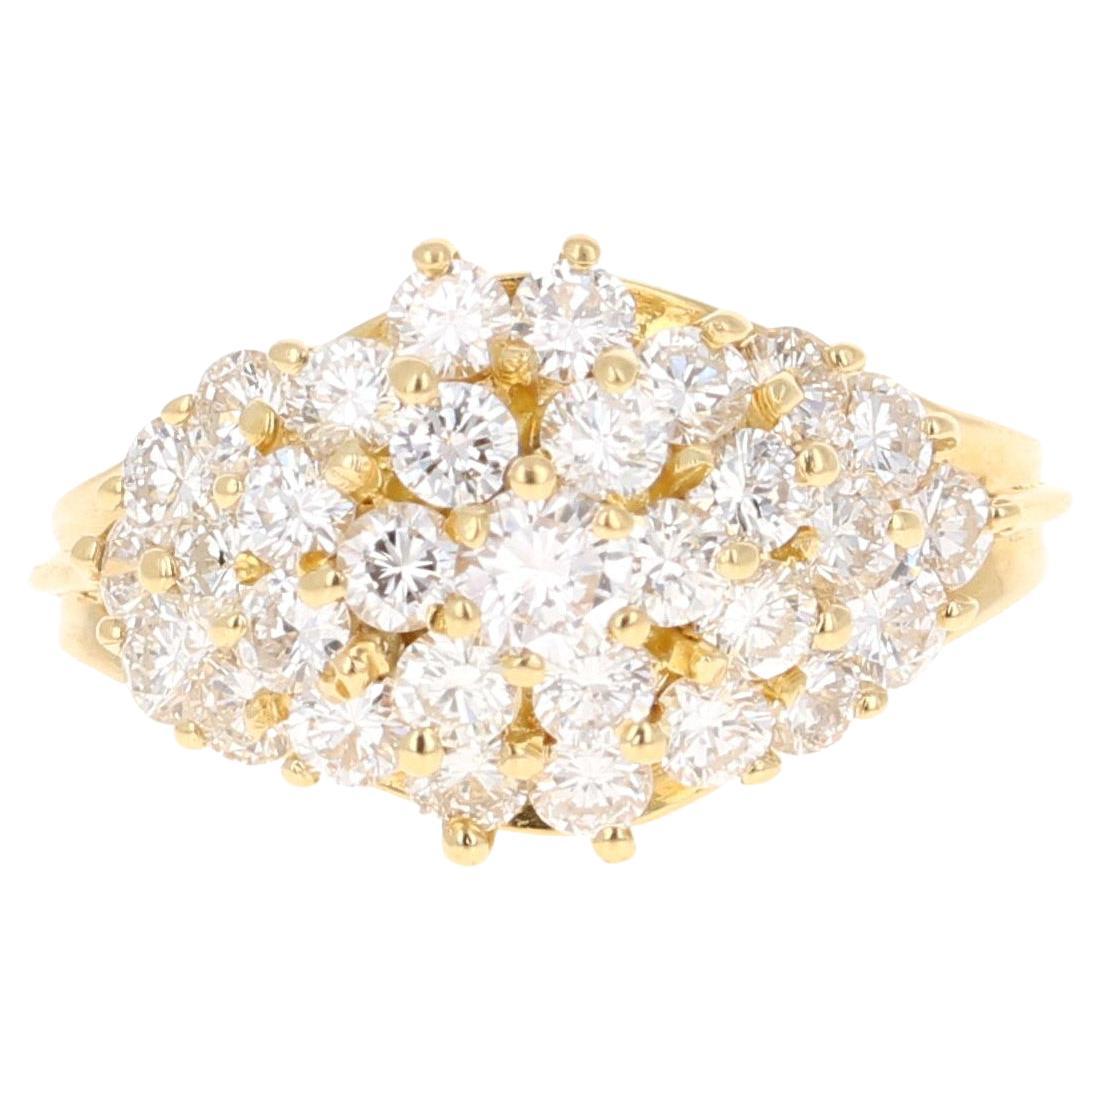 This ring has a cluster of diamonds that weigh 1.50 carats. (Clarity: VS, Color: F)

It is beautifully set in 14 Karat Yellow Gold and weighs approximately 6.9 Grams

The ring is a size 7 and can be re-sized free of charge. 


